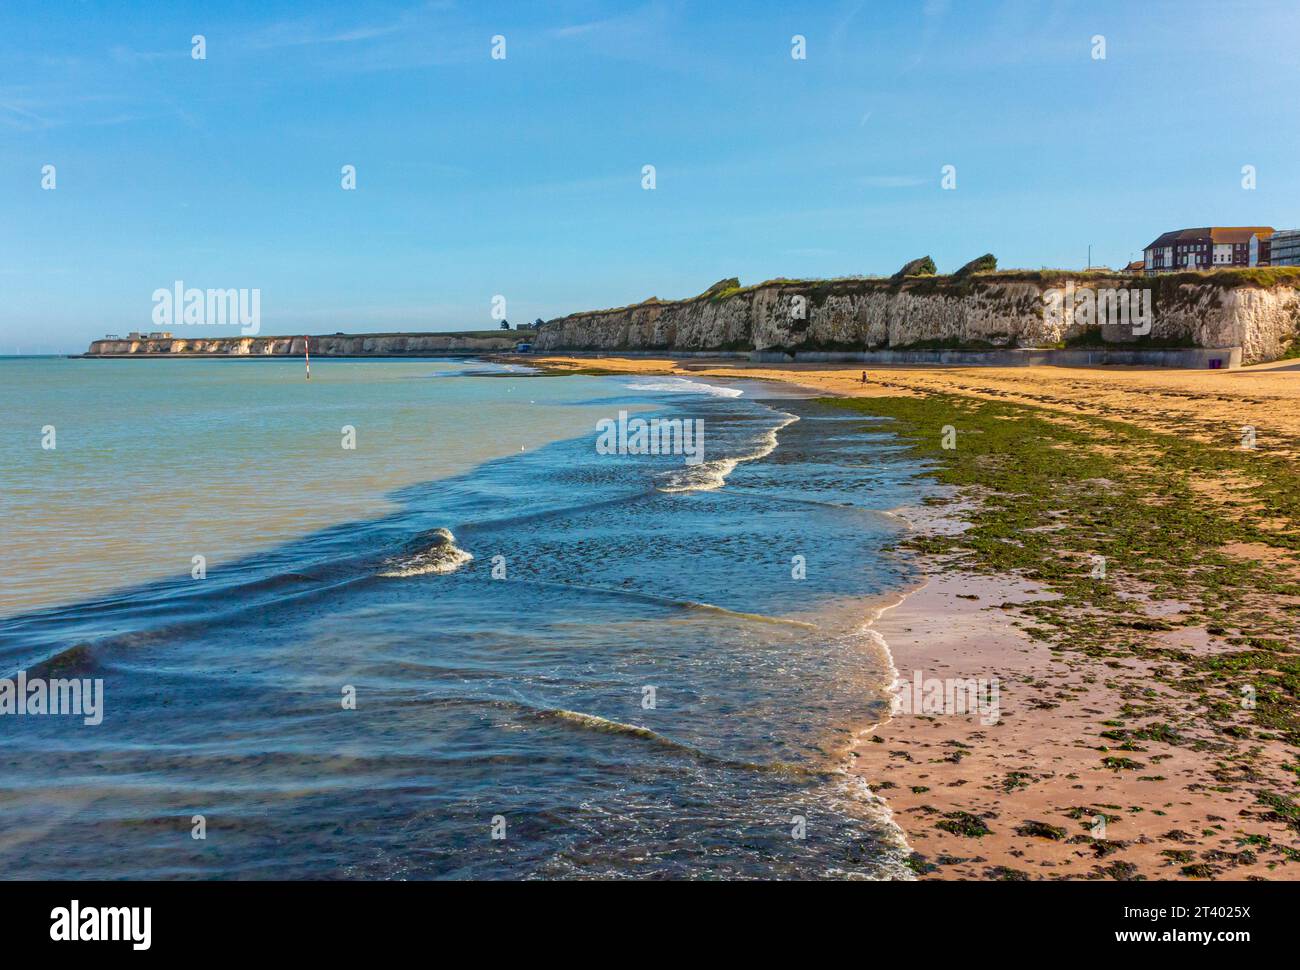 The beach and chalk cliffs at Palm Bay near Cliftonville Margate on the north coast of Thanet Kent England UK near the Thames Estuary. Stock Photo